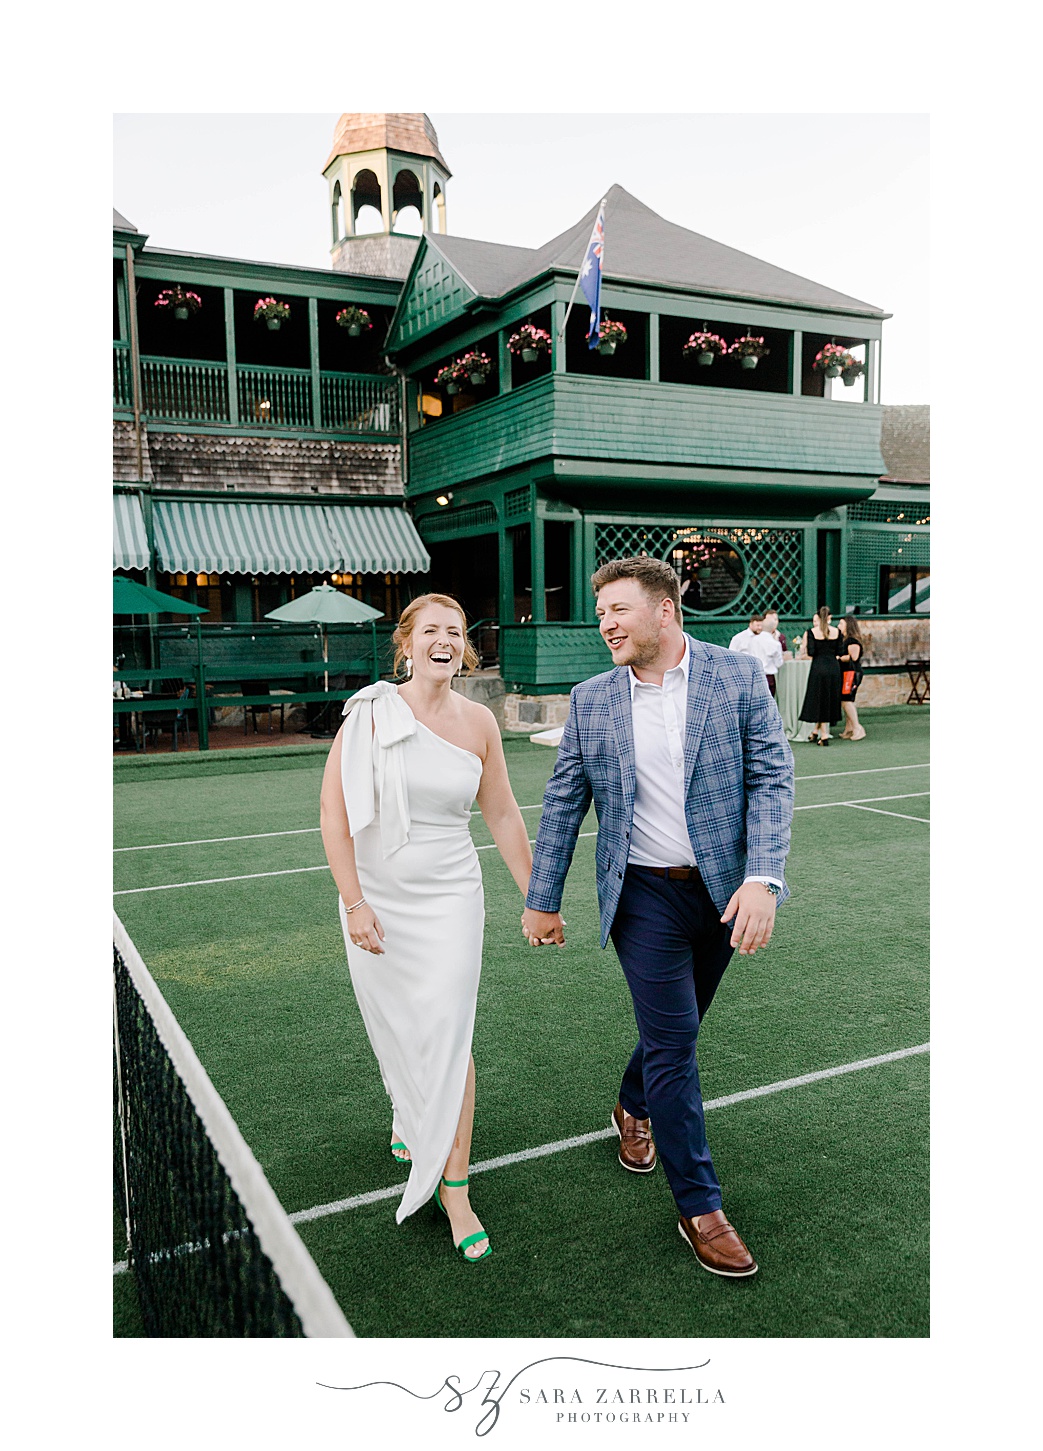 couple laughs walking on tennis court at The International Tennis Hall of Fame